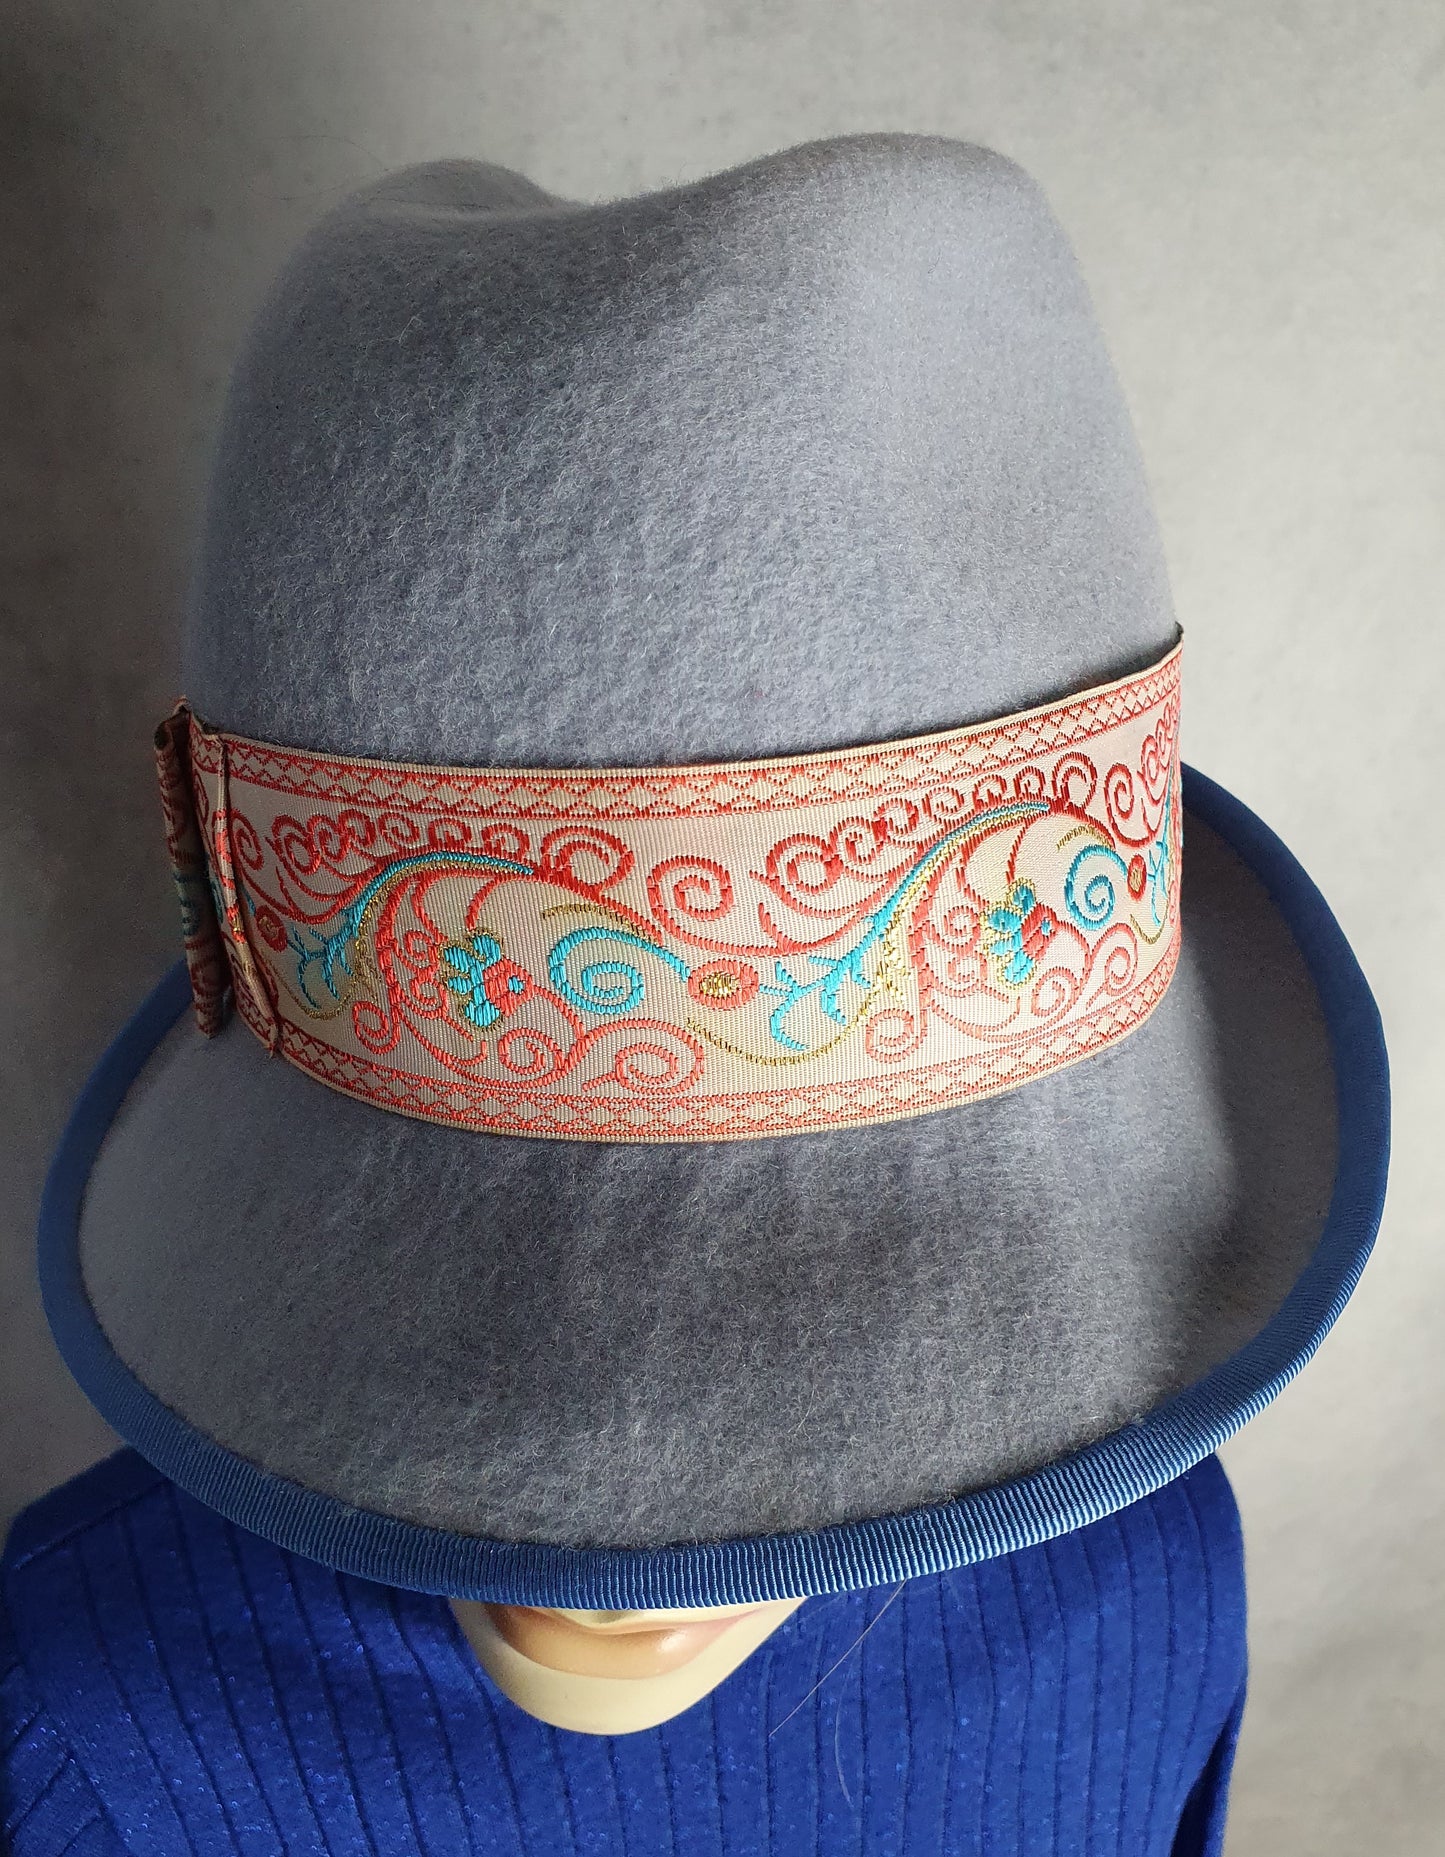 Handmade blue felt fedora hat for women and men, hair accessory, stylish hat unisex, winter hat- special occasions